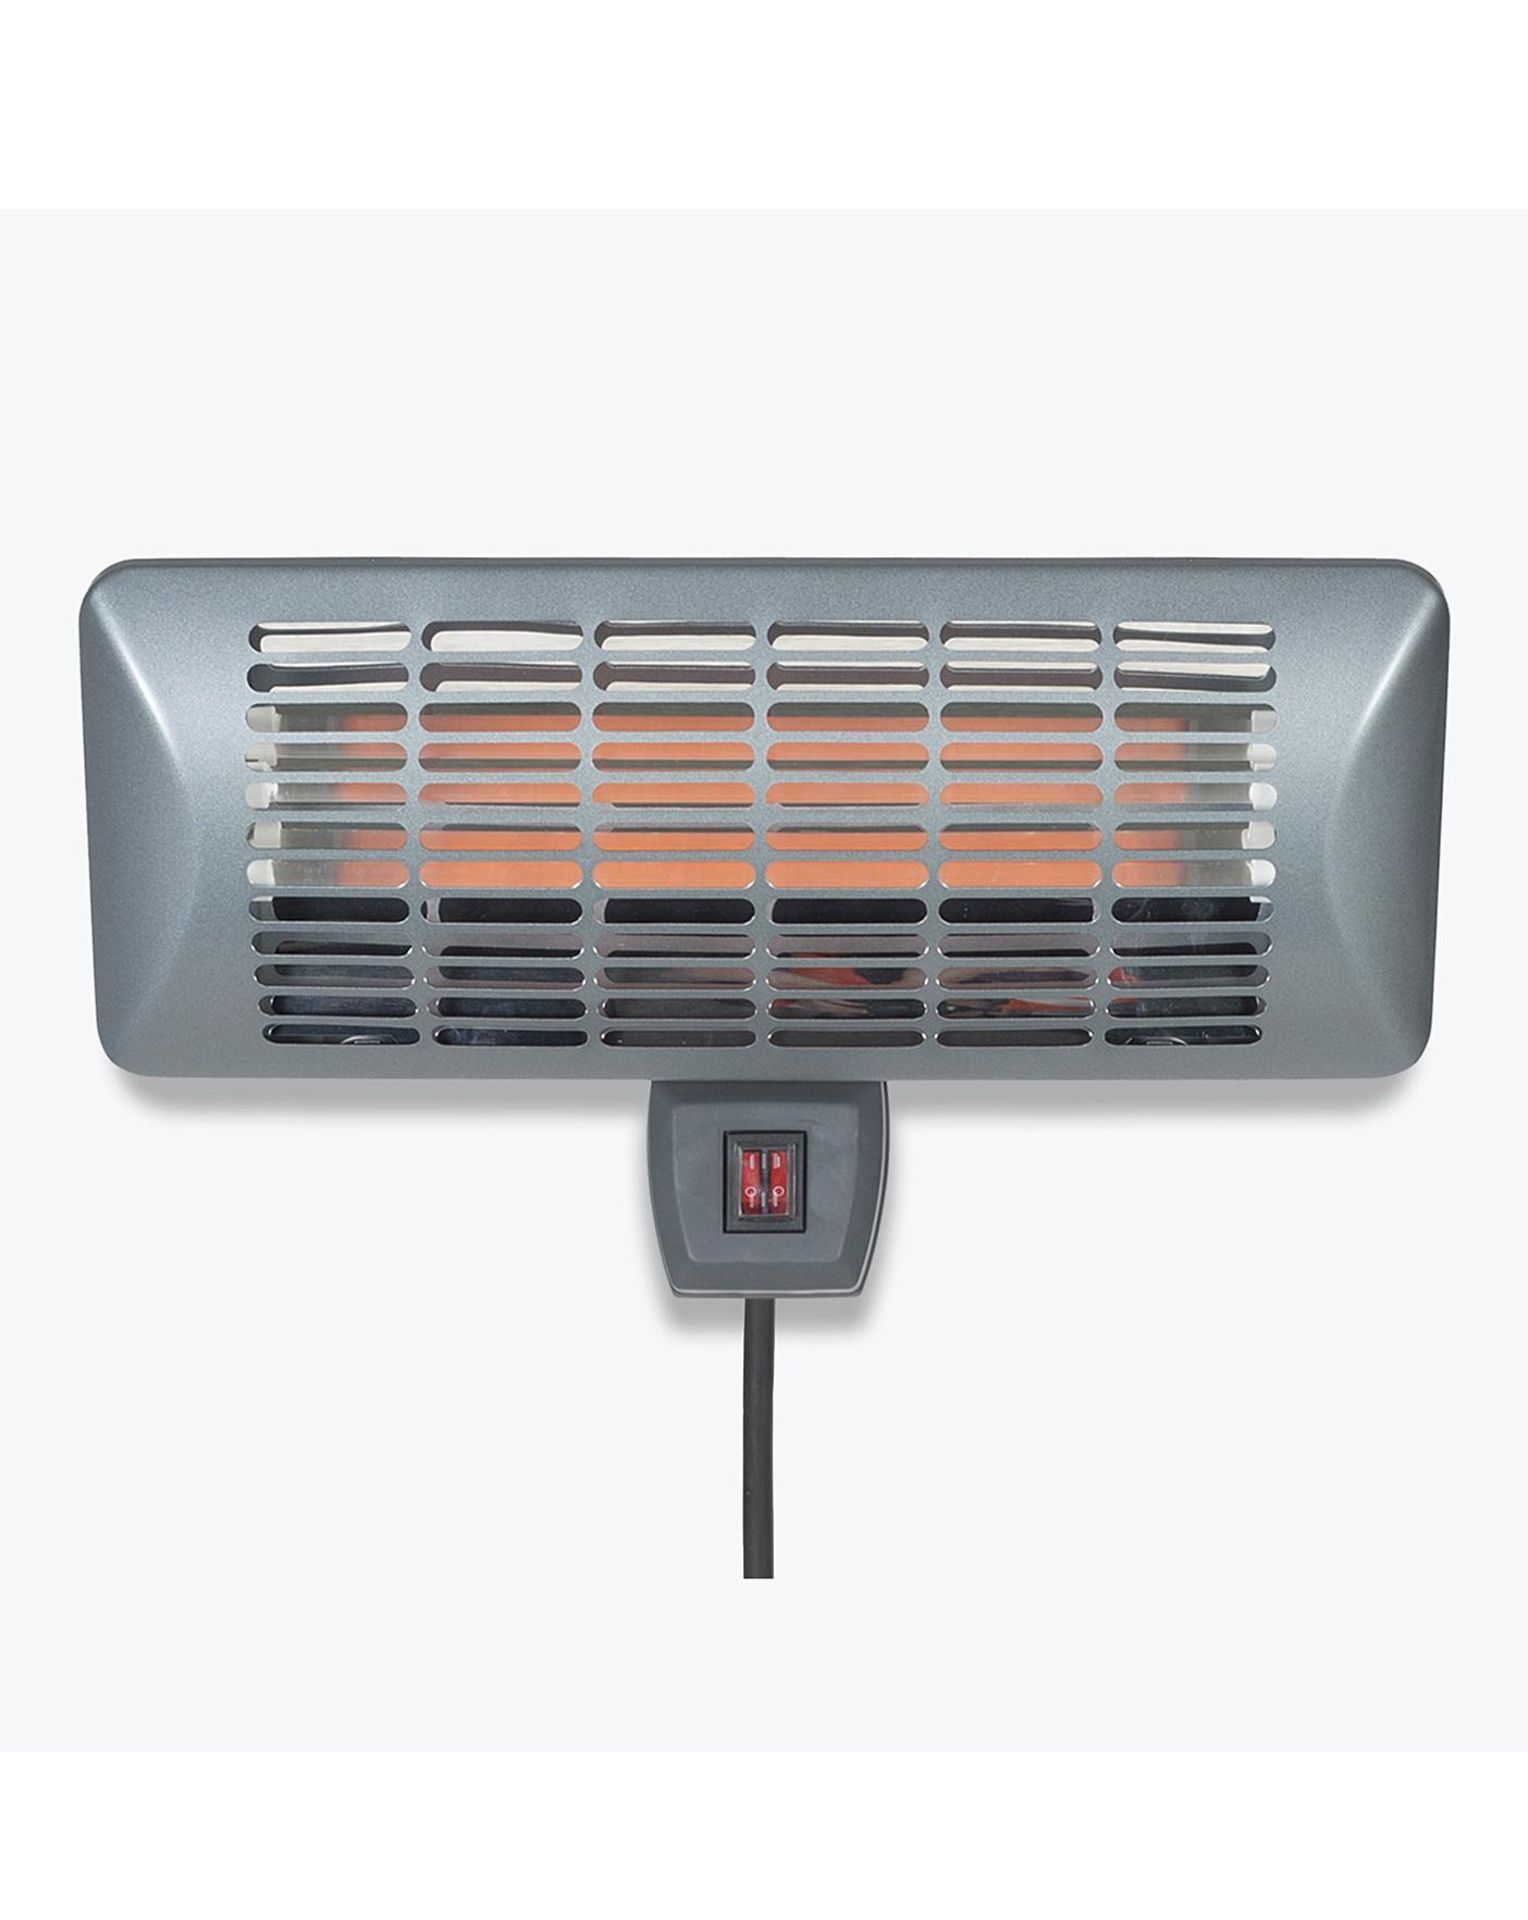 2x NEW & BOXED LA HACIENDA Wall Mounted Quartz Heater. RRP £54.99 EACH. With the Wall Mounted Quartz - Image 2 of 3